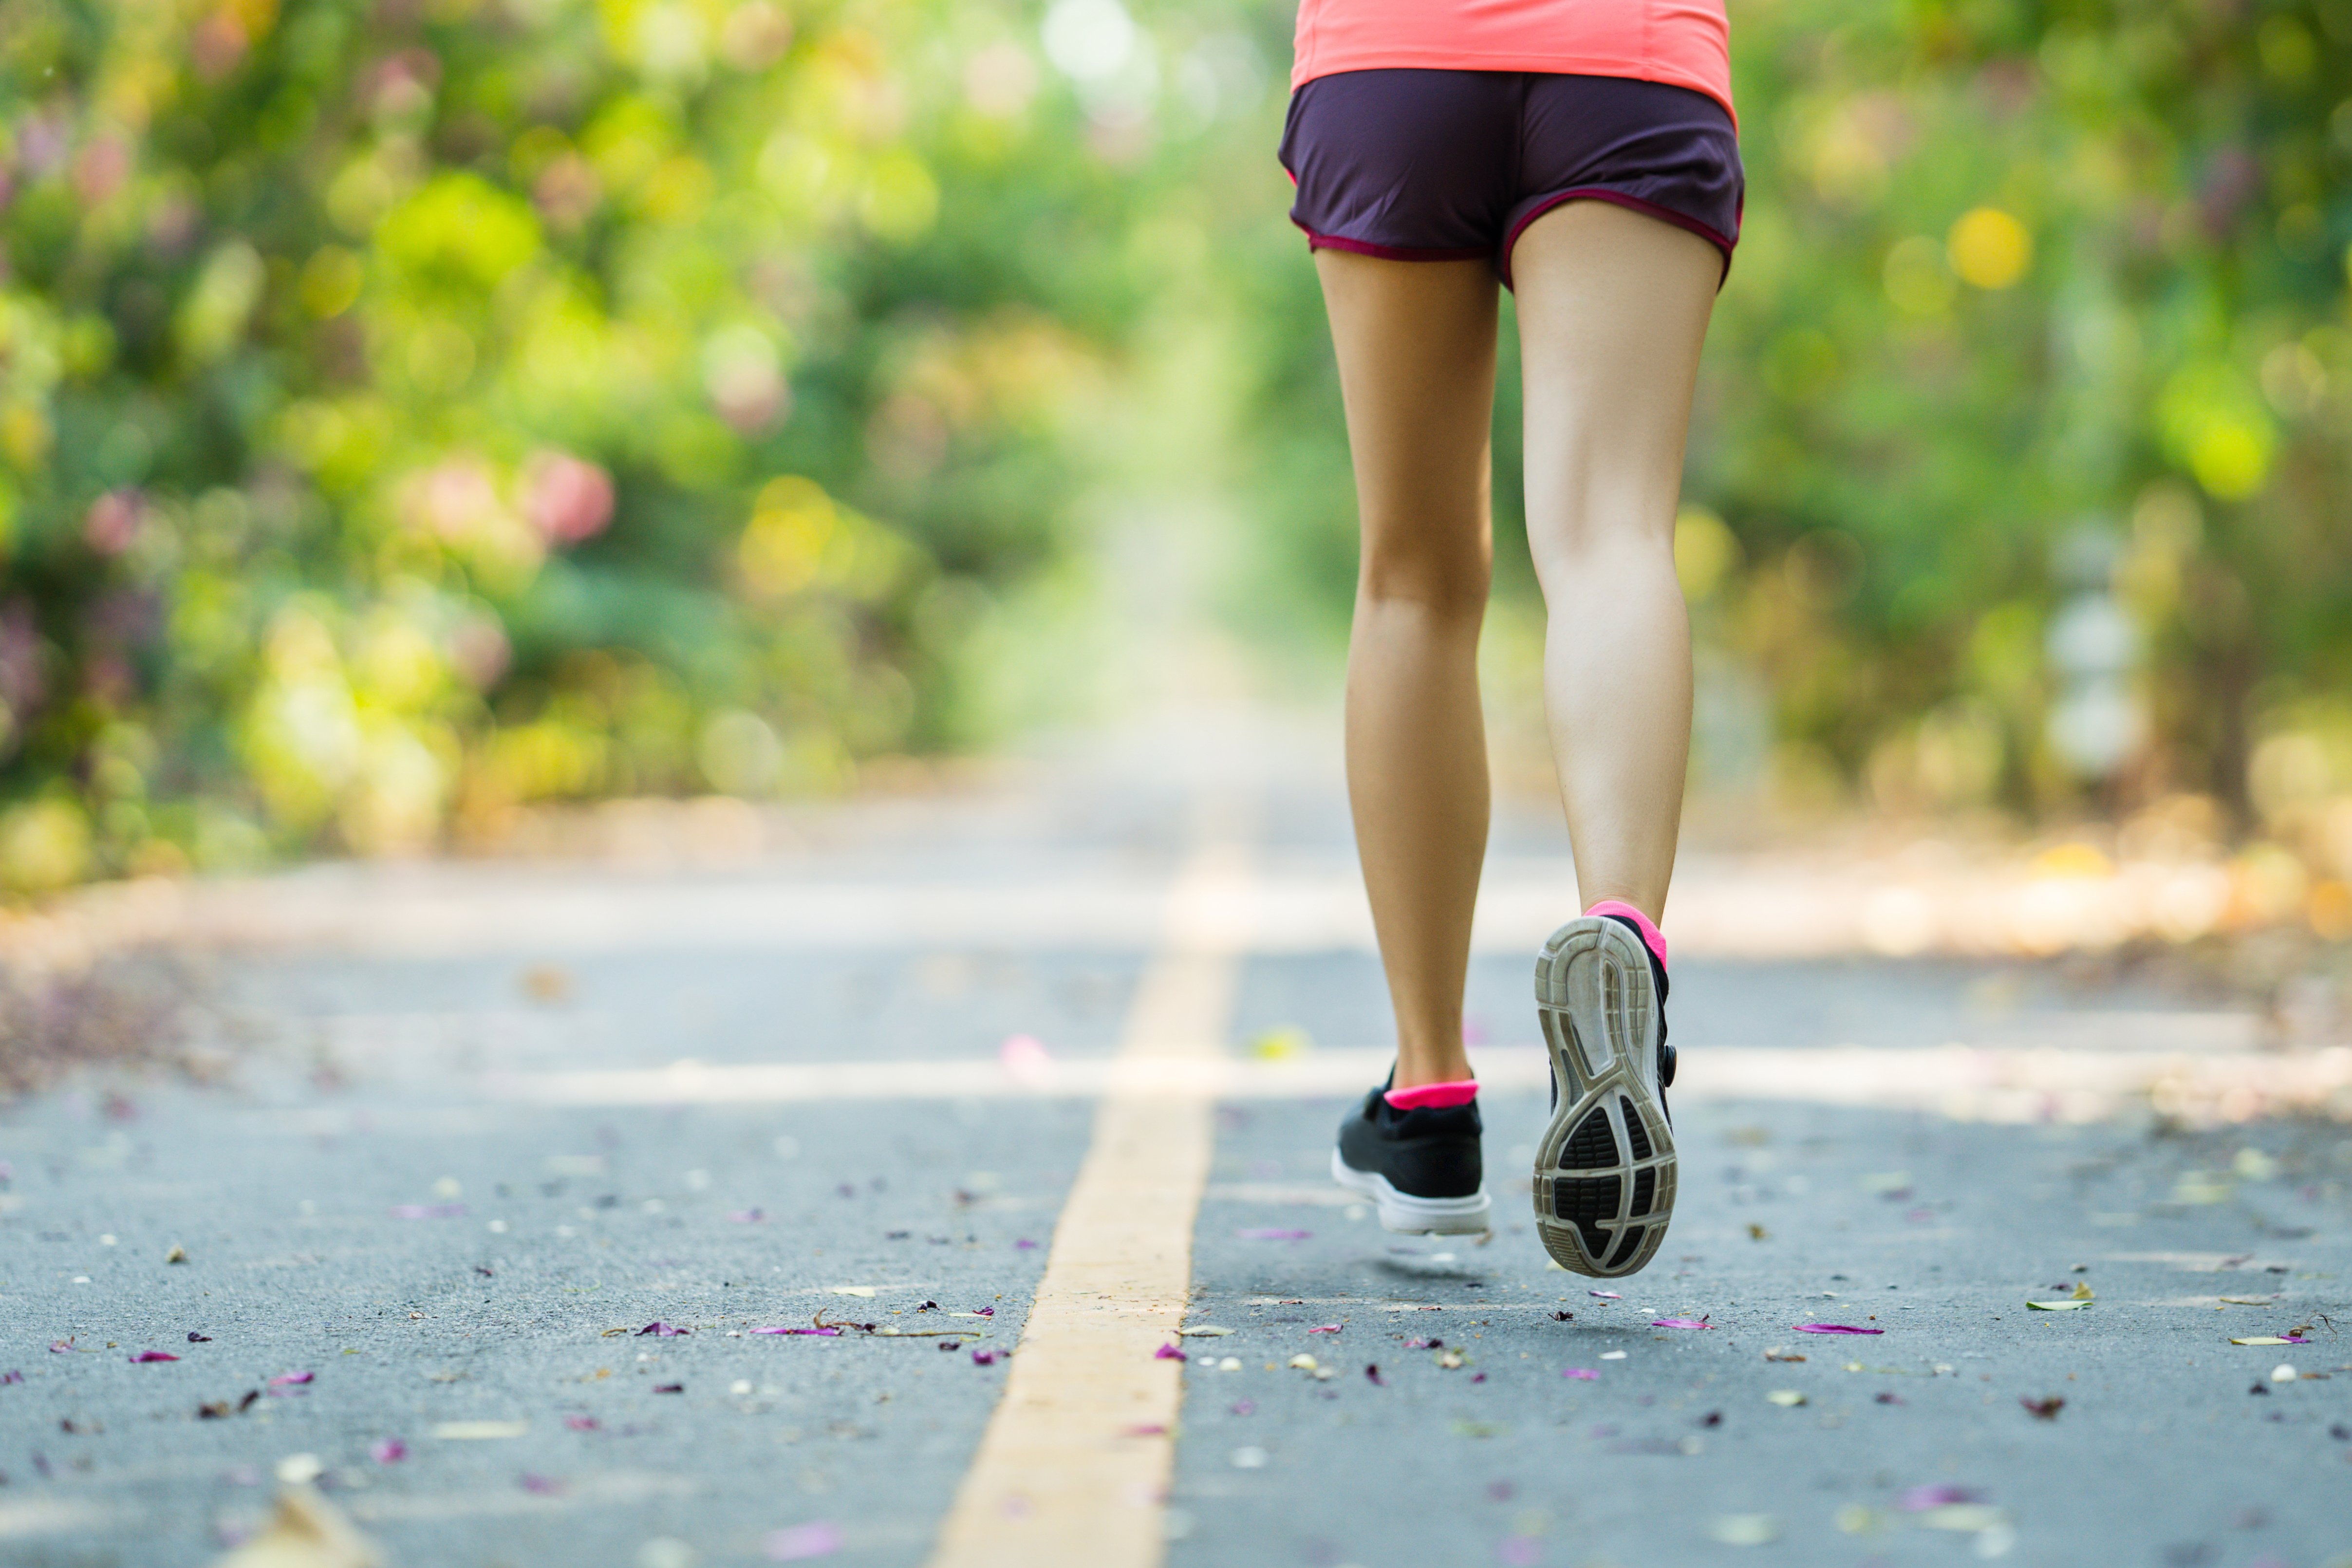 bottom half of woman running on a greenery filled trail